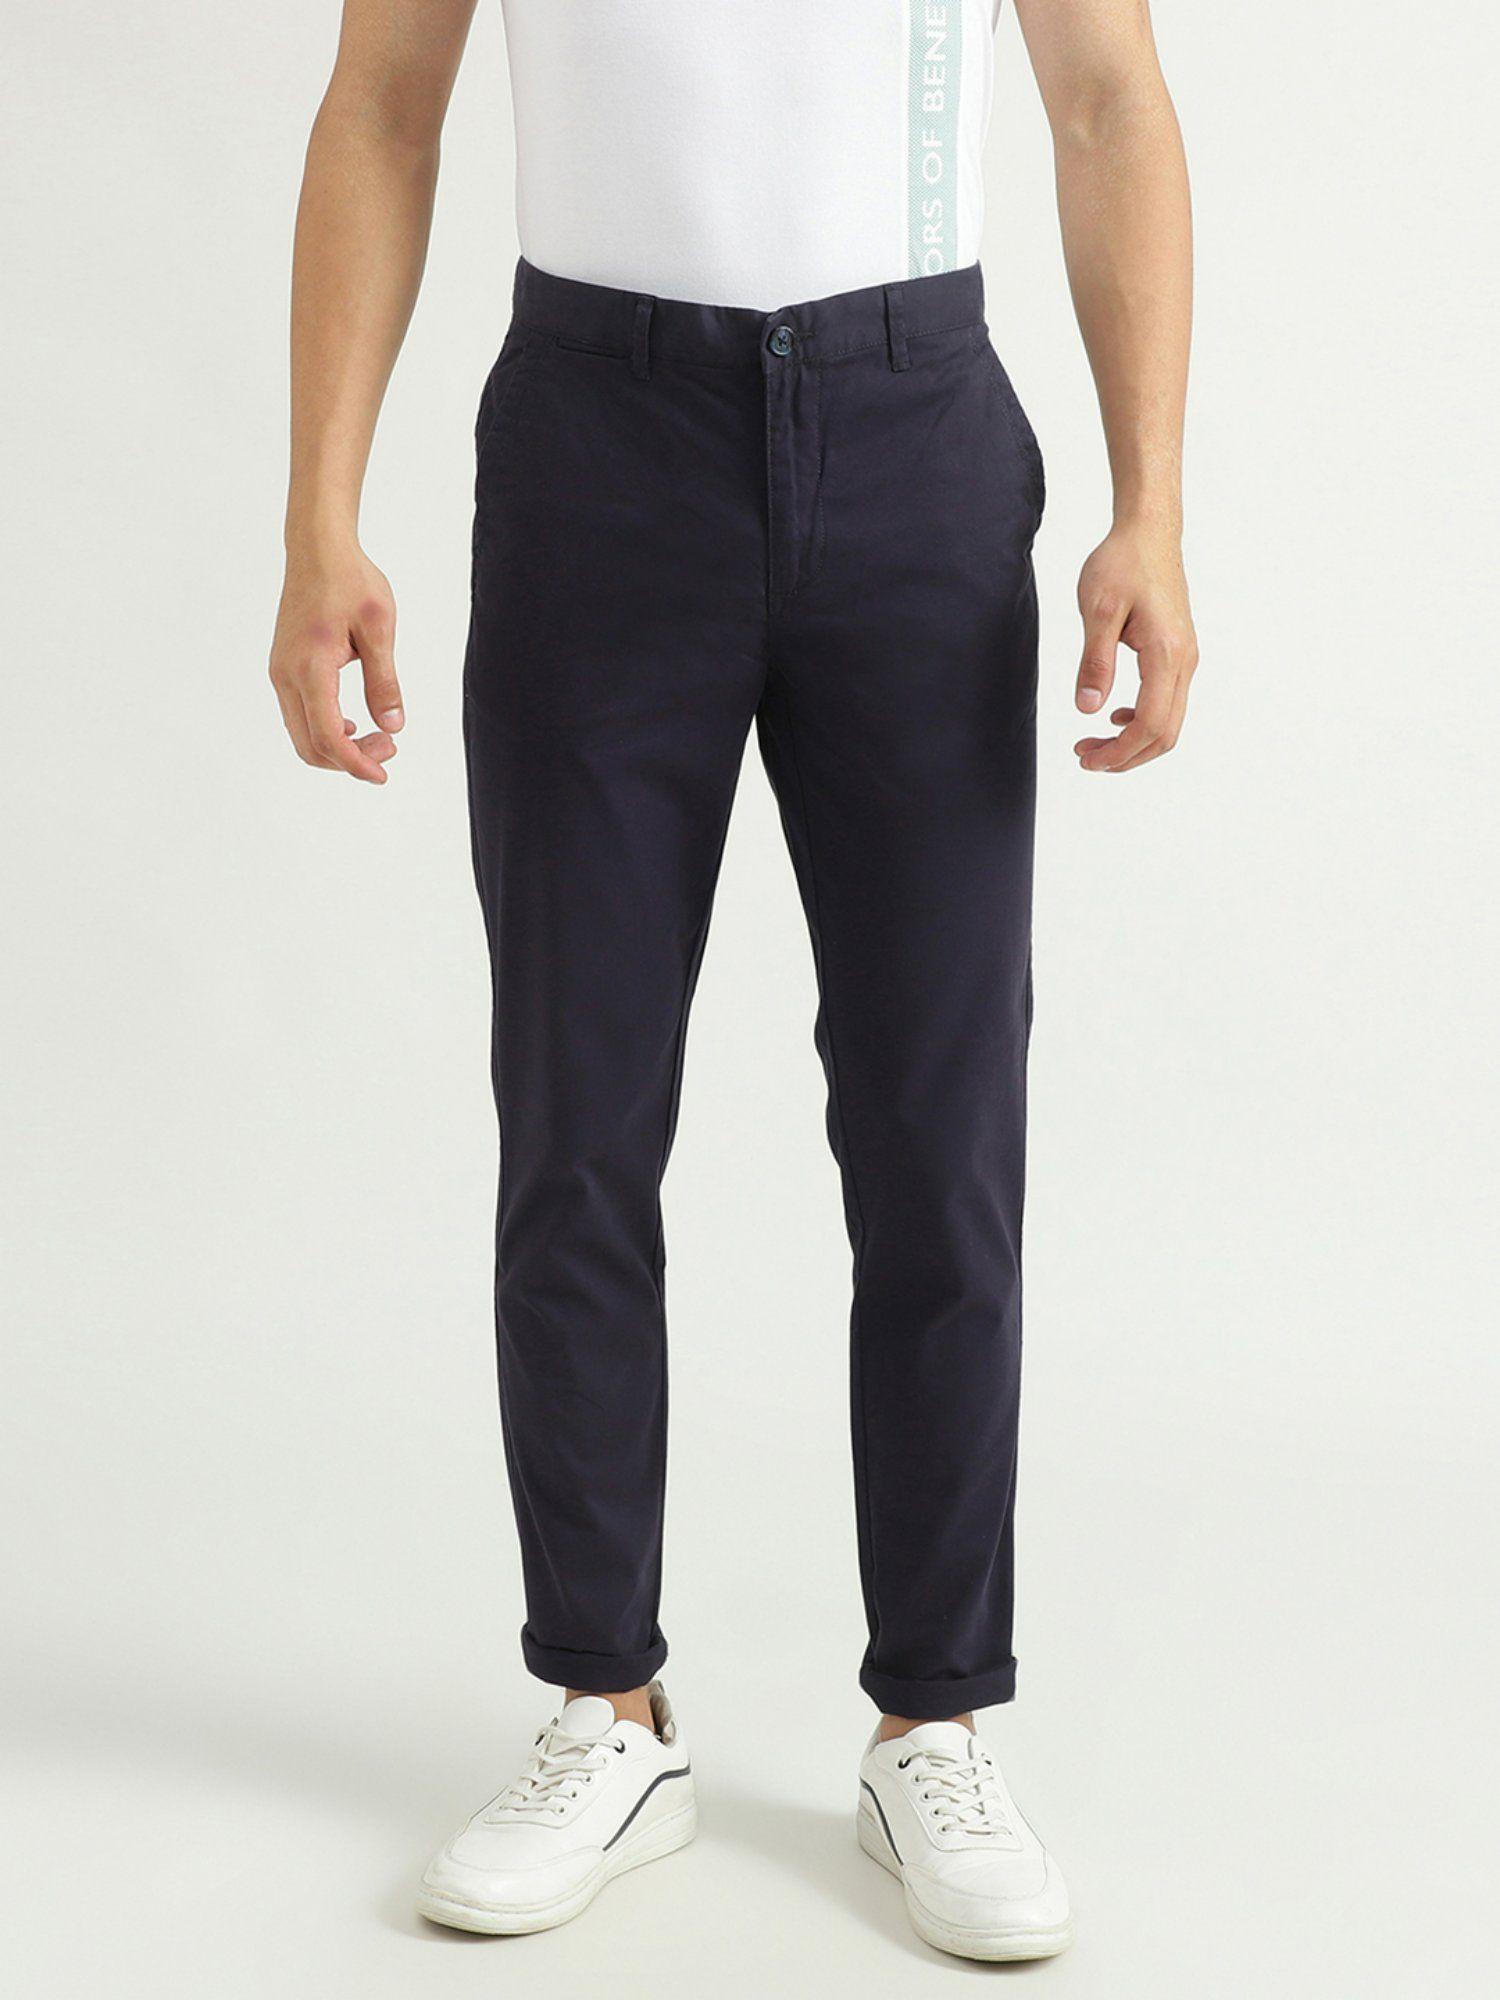 mens-solid-trousers-navy-blue